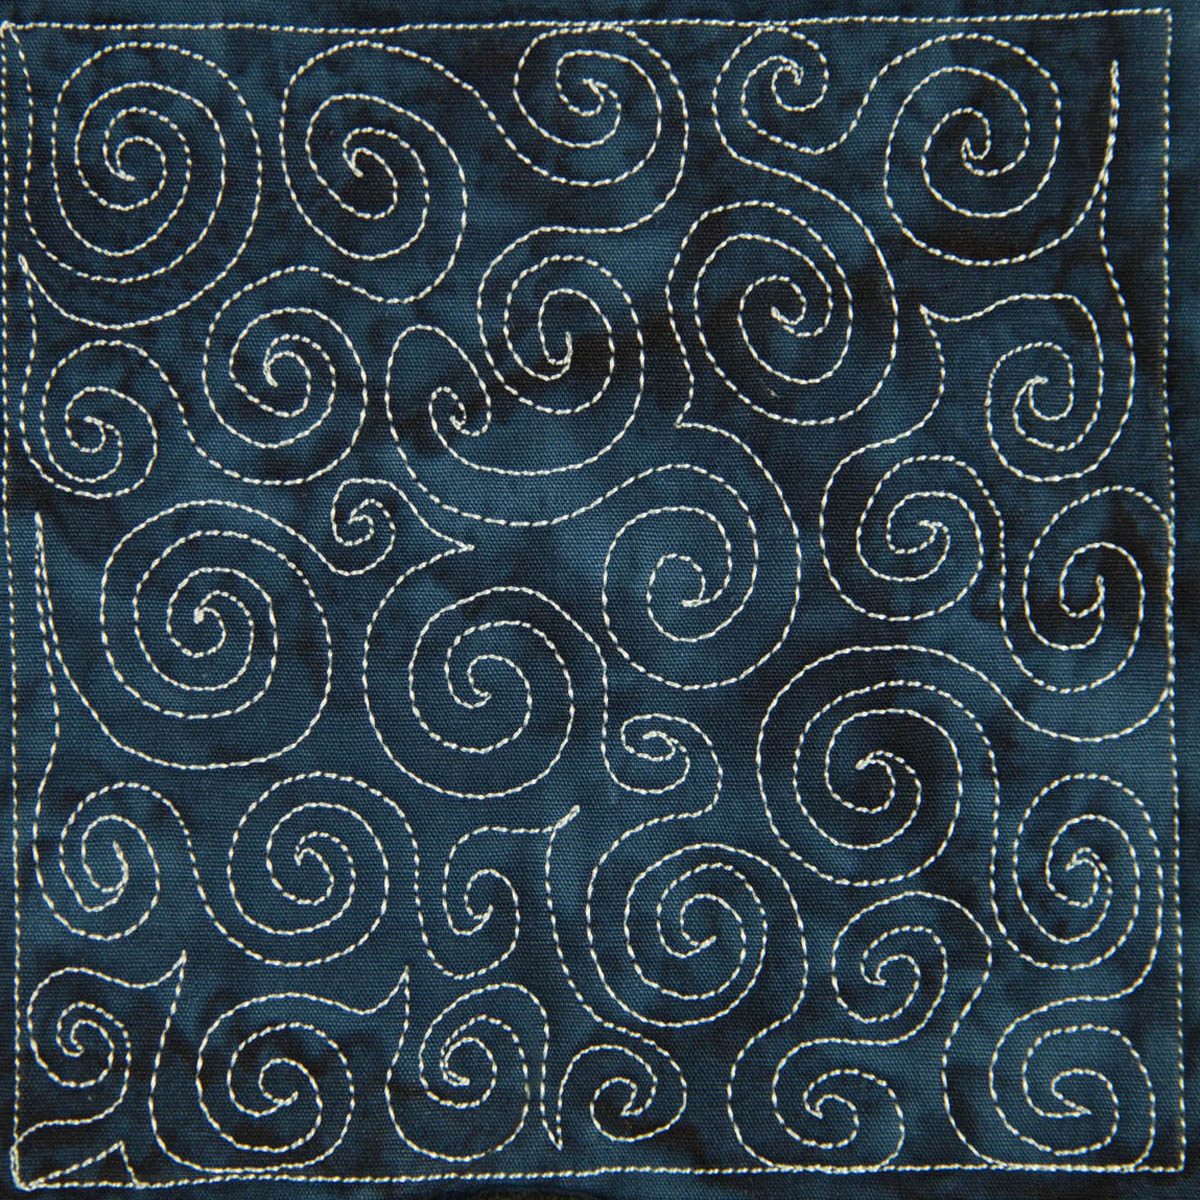 the-free-motion-quilting-project-day-5-basic-spiral